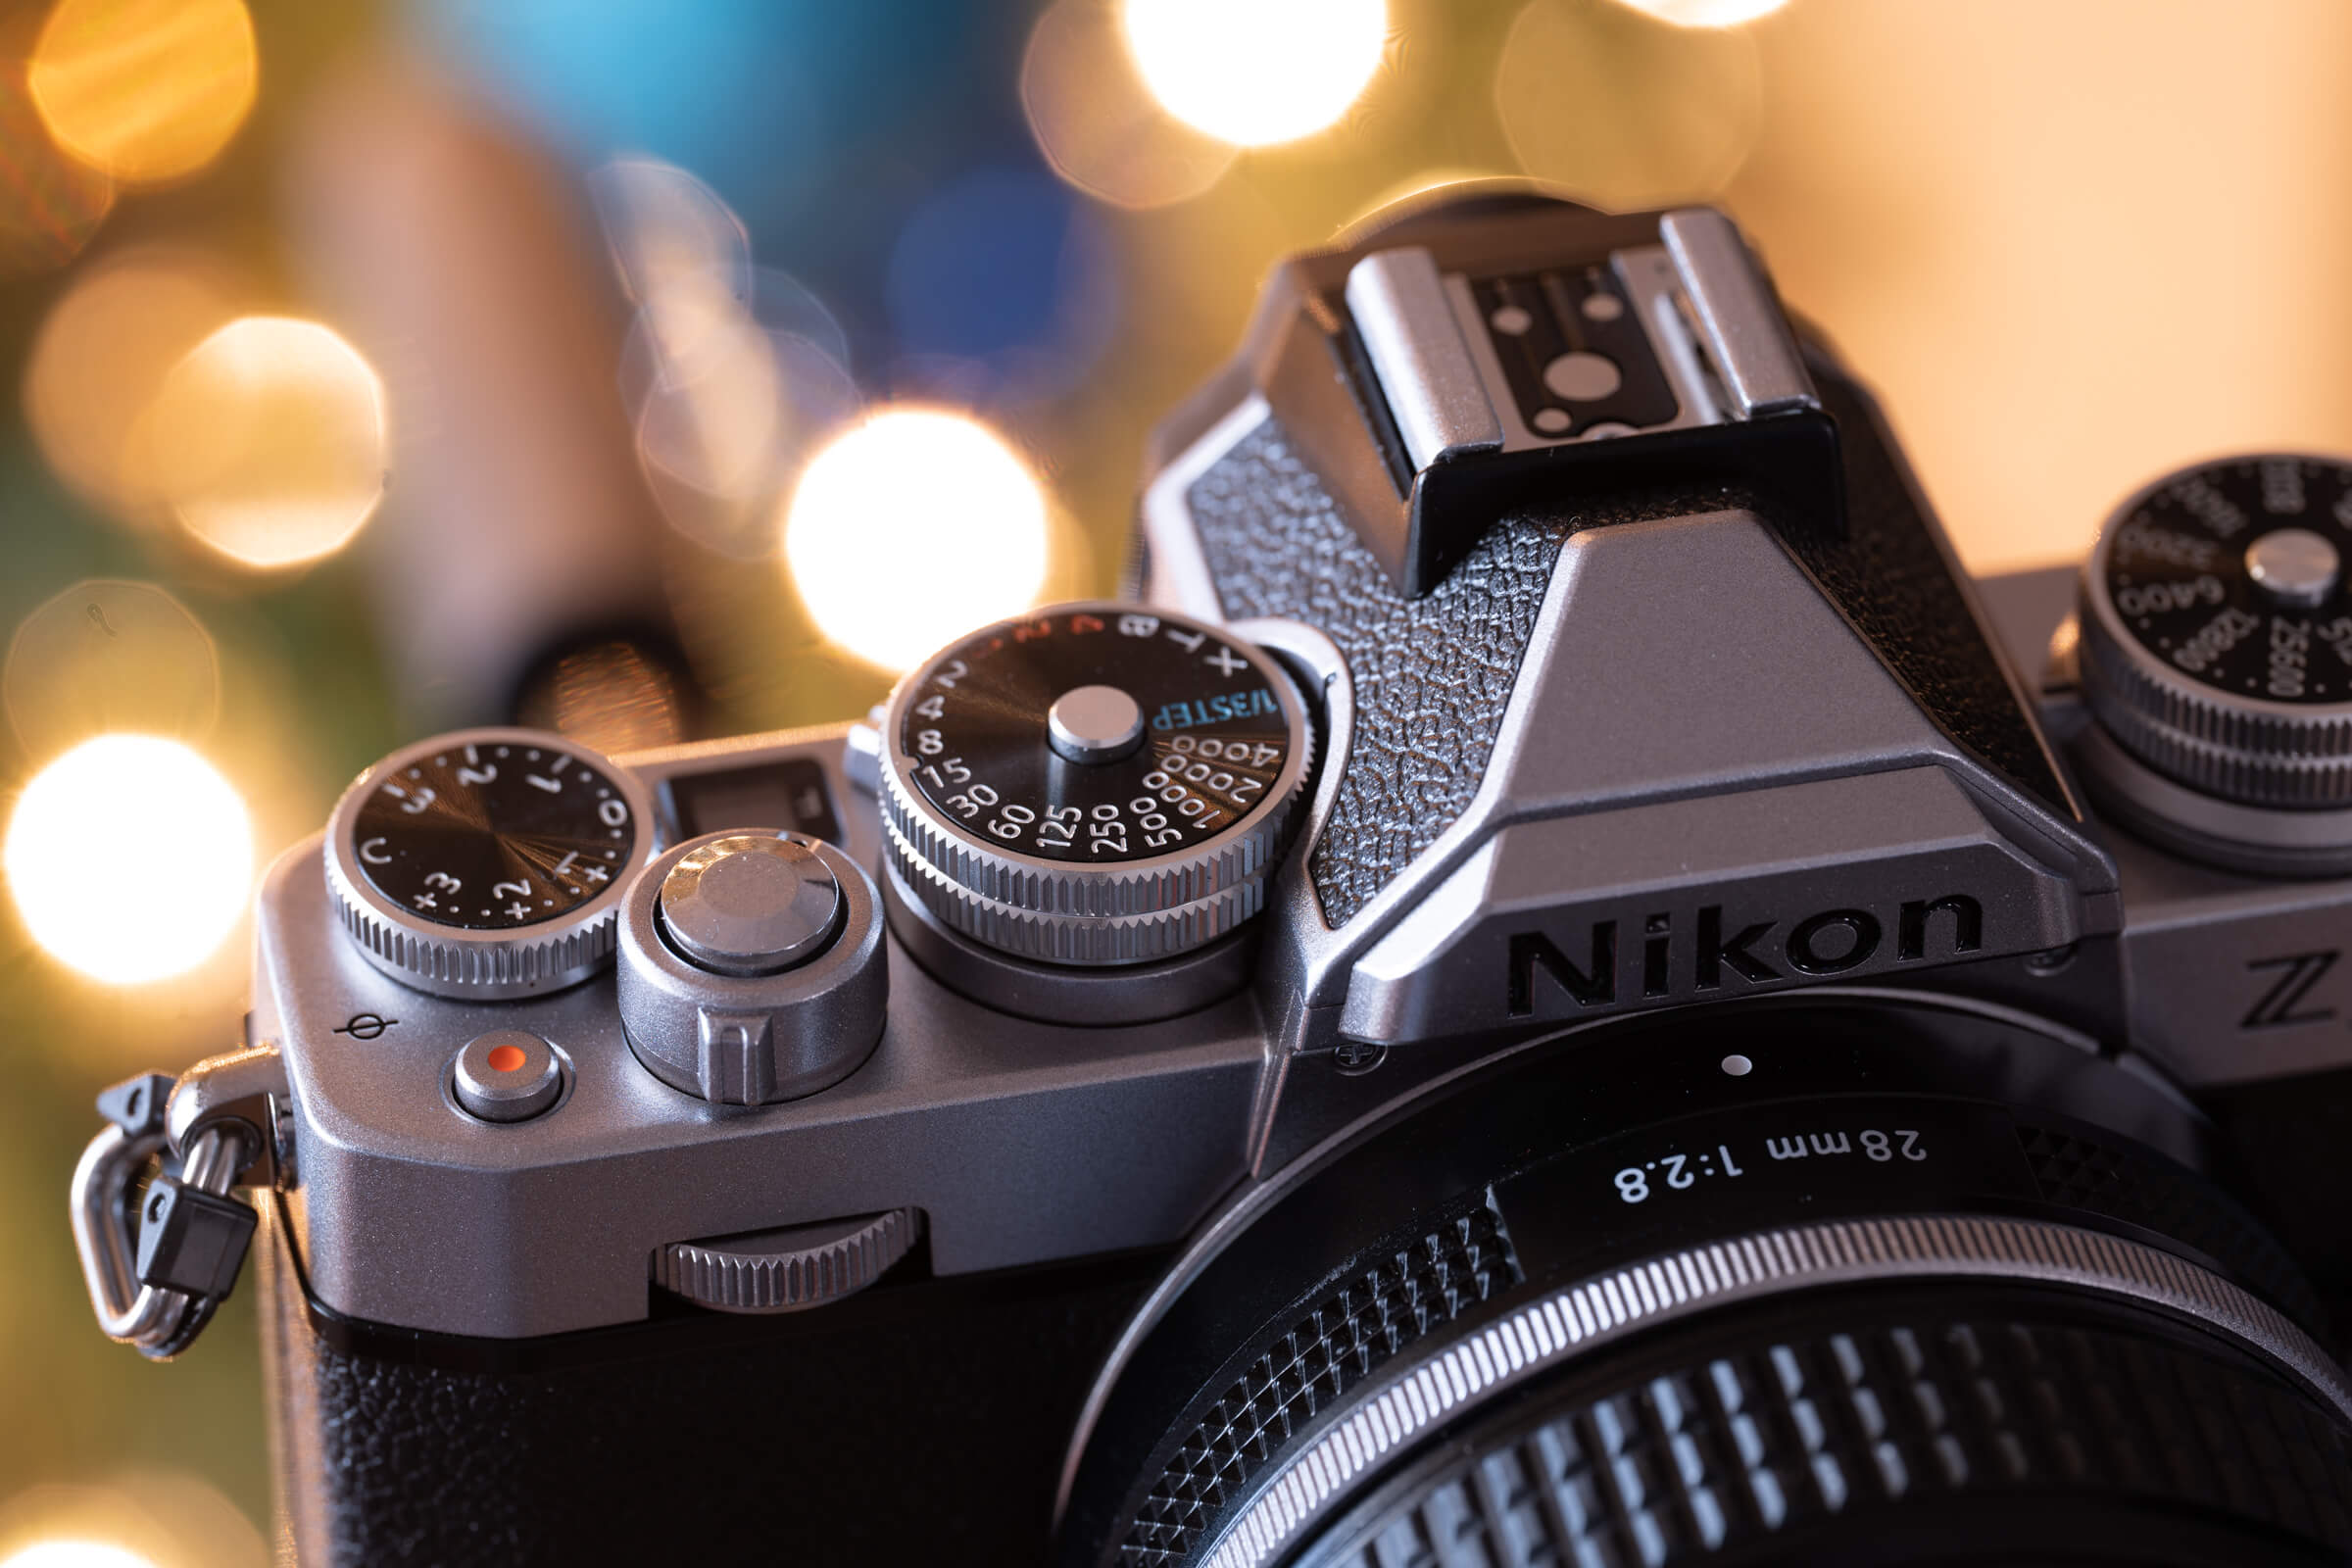 Nikon Z fc review: A camera filled with few highs and many lows